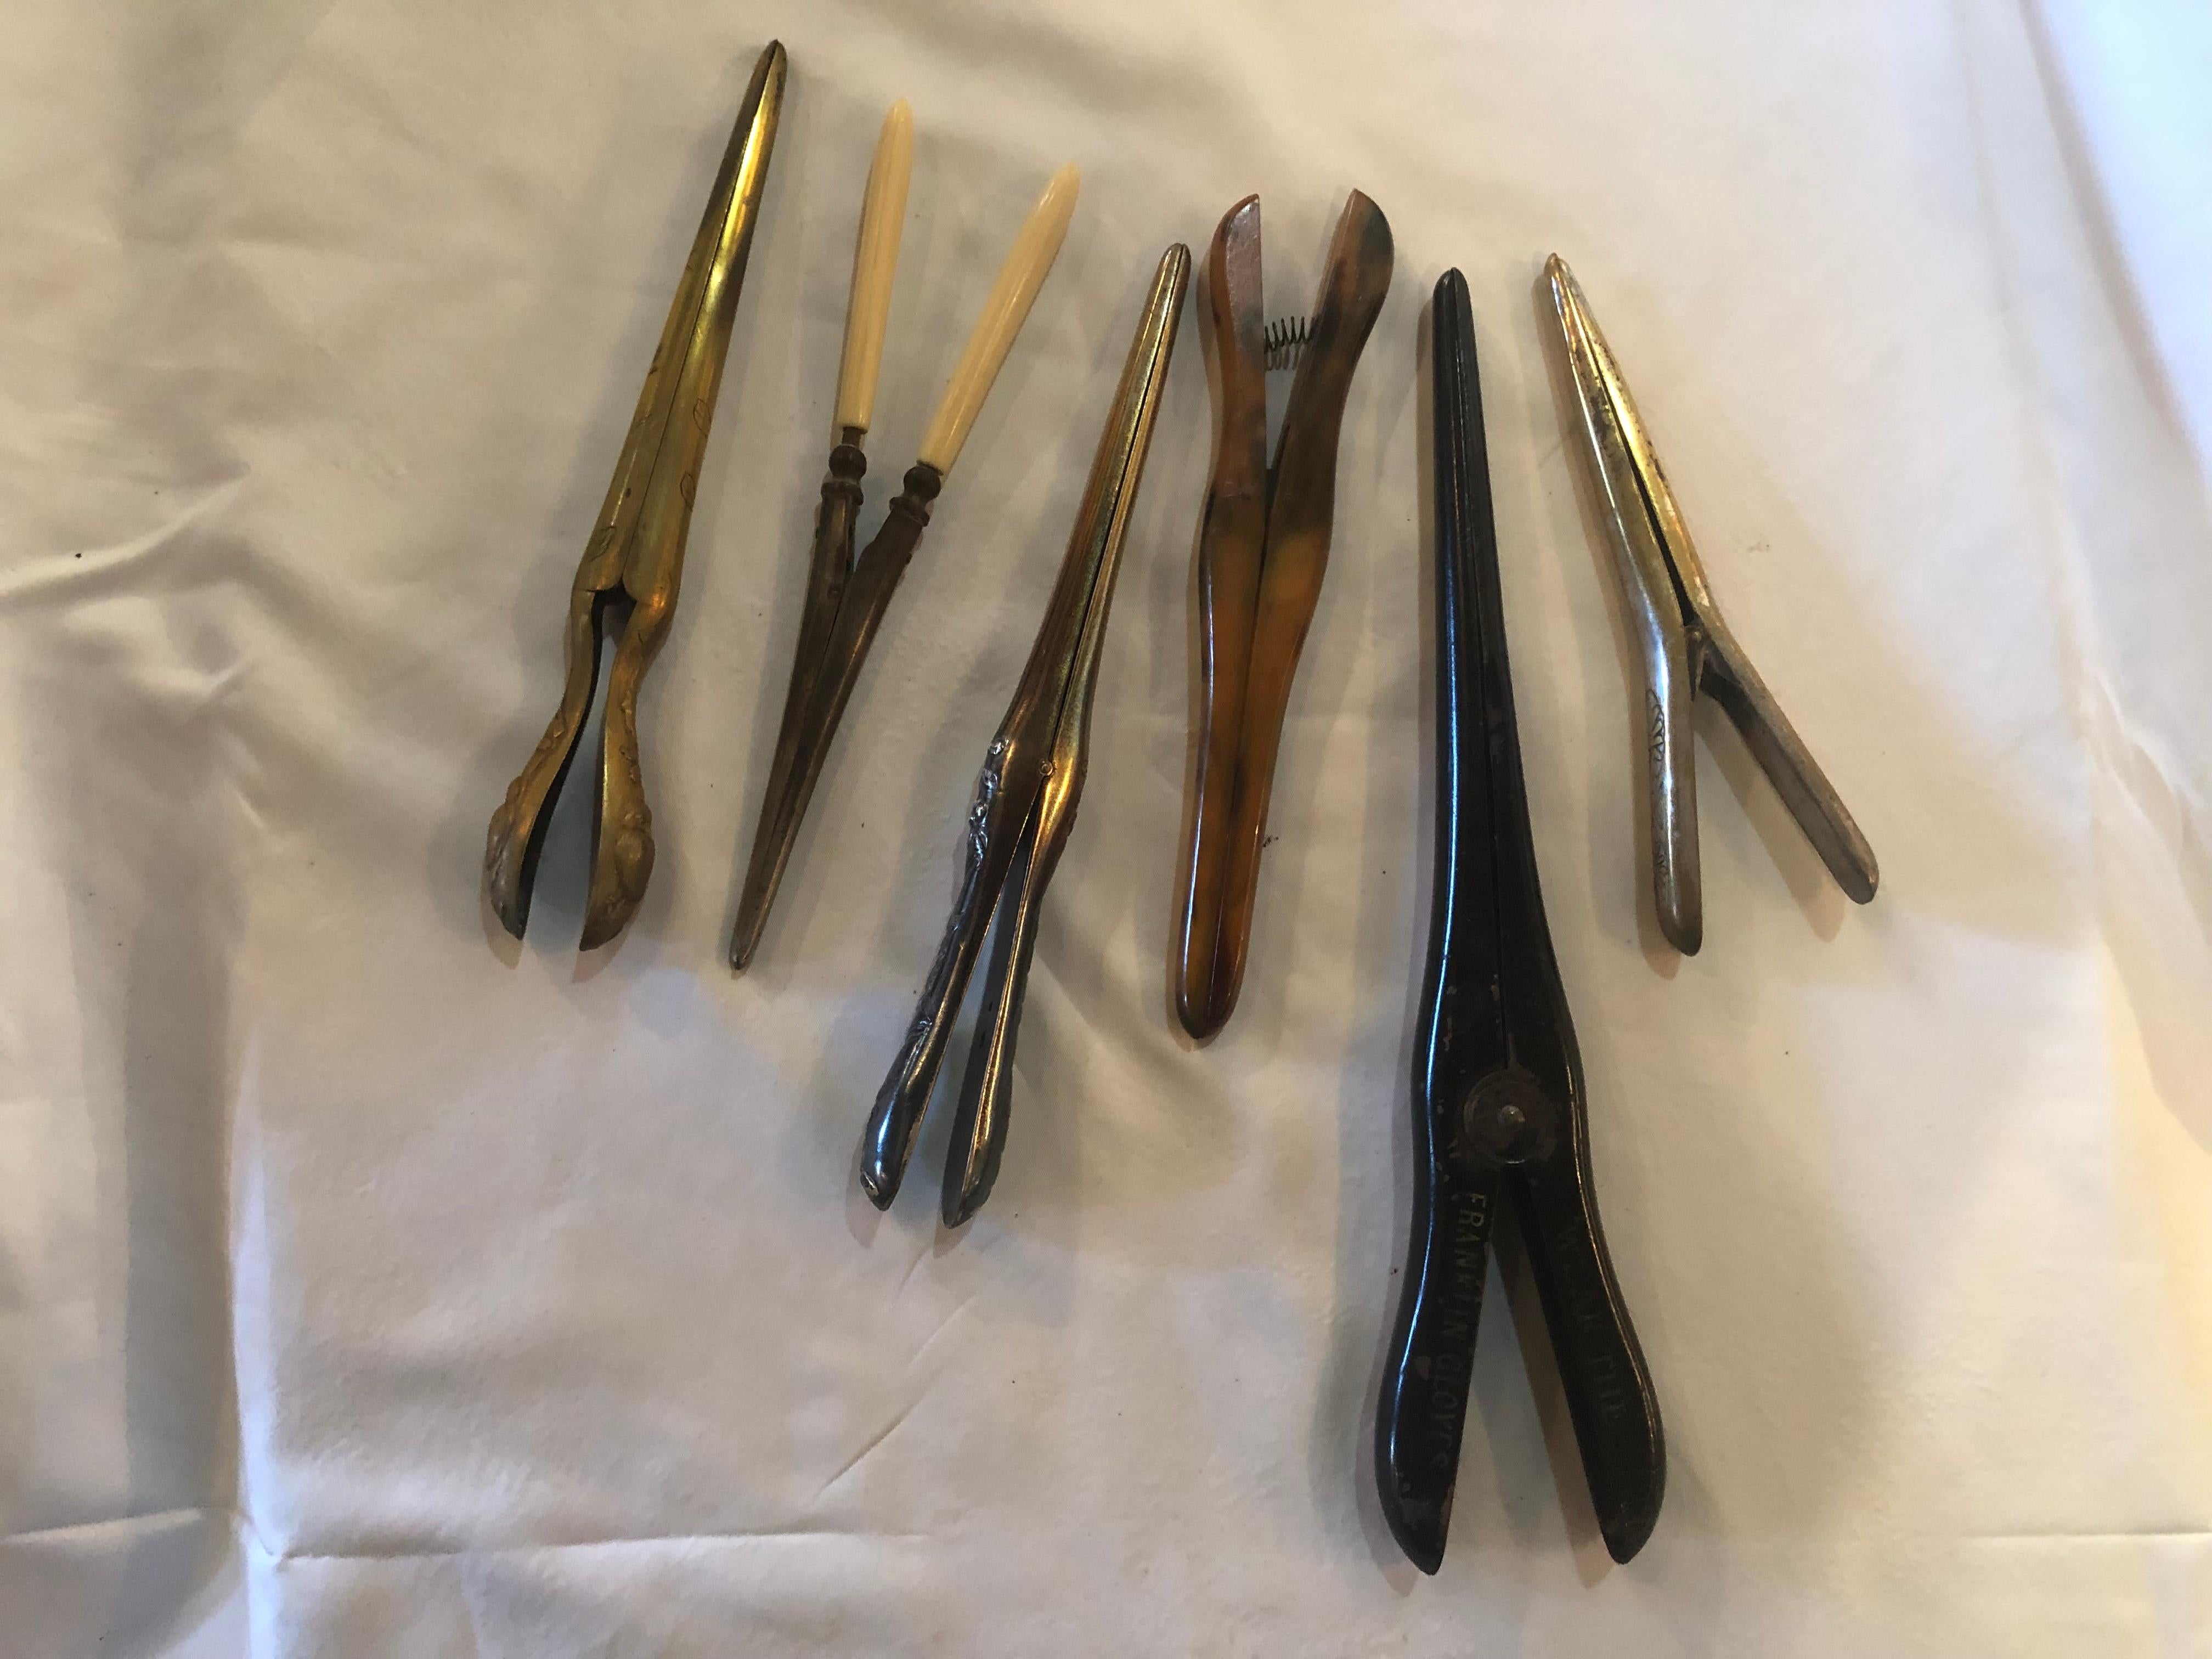 A fine group six custom designed collectible assorted metal and one Bakelite antique glove stretchers all having spring action. Some Engraved, signed and labeled Franklin Glove Company. Largest measures 11 inches. Smallest at 6.50 inches. Would look